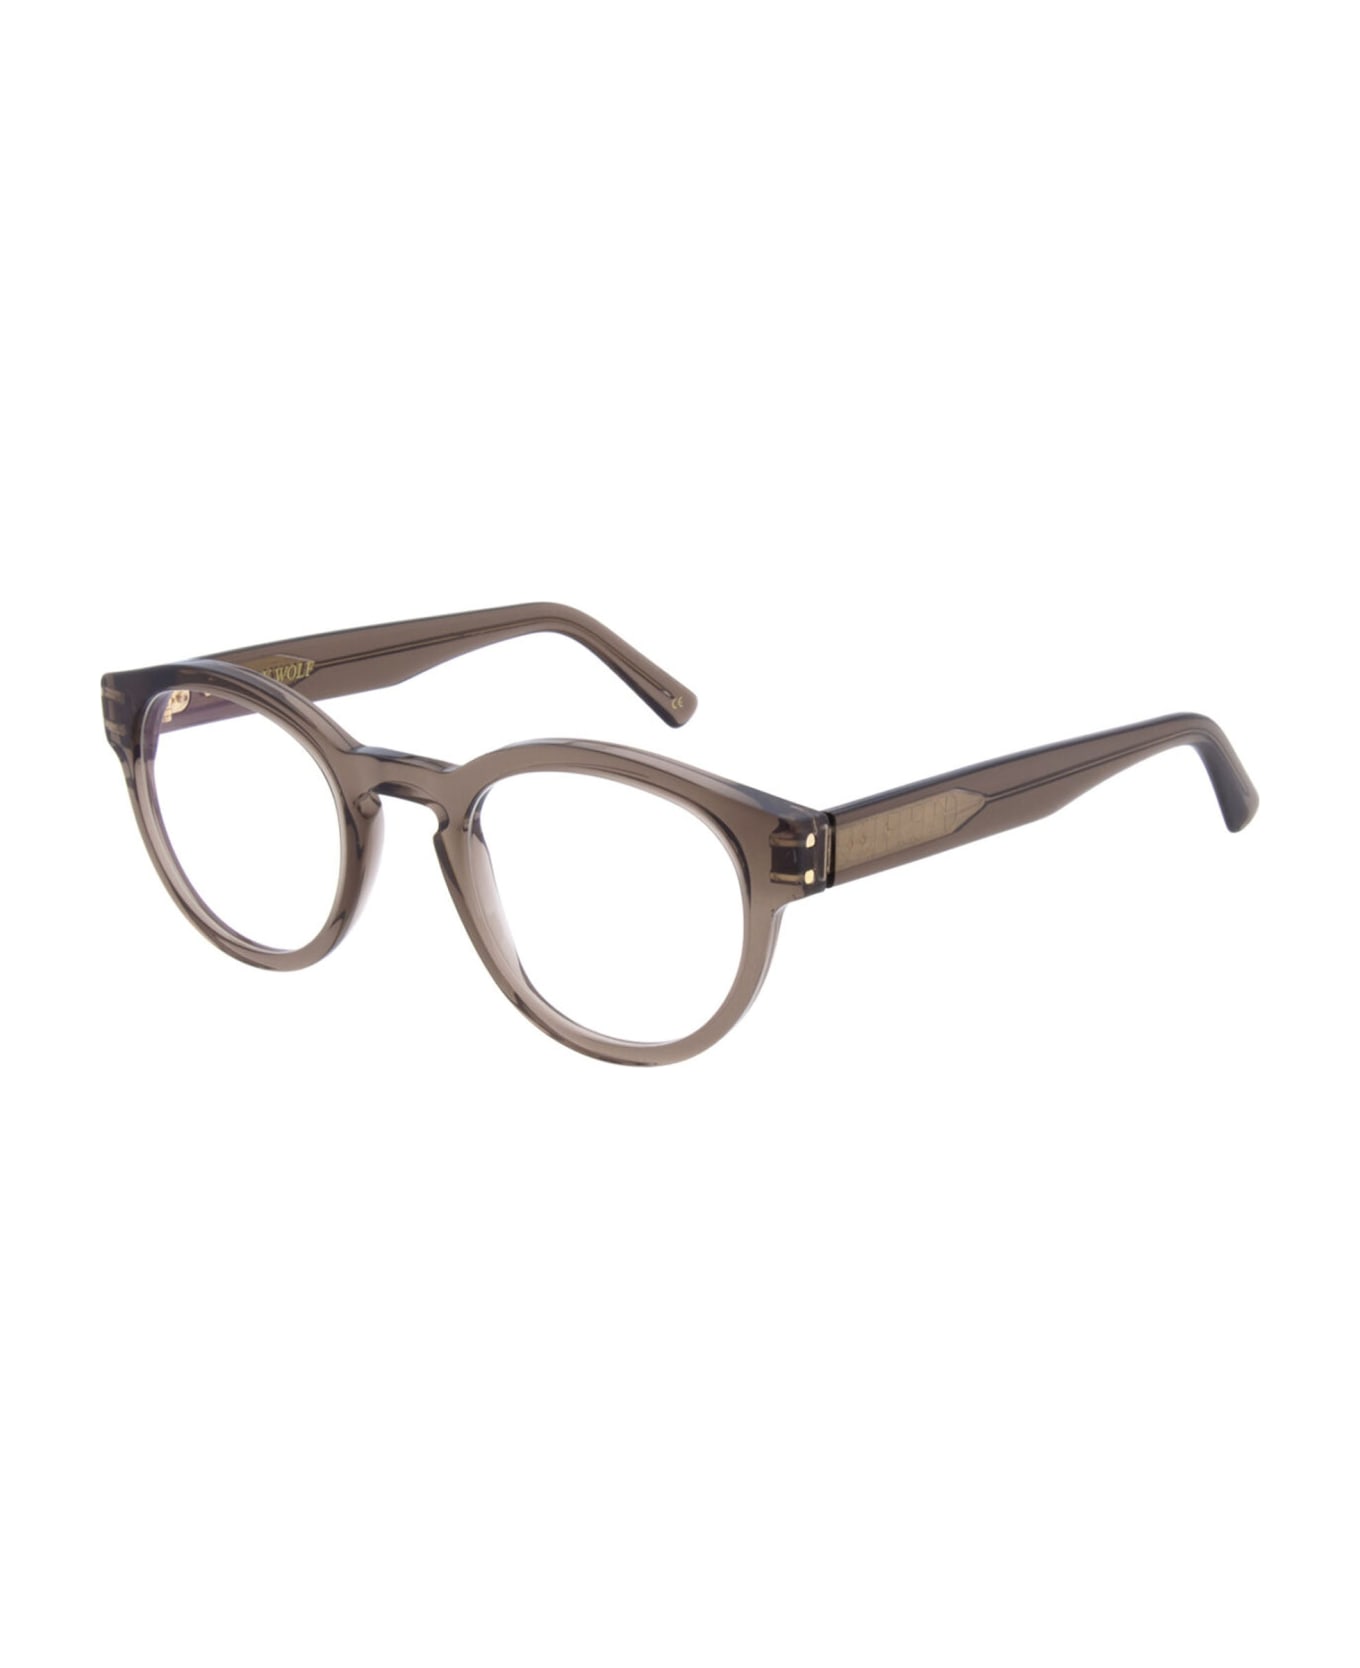 Andy Wolf Aw03 - Brown / Gold Glasses - light brown